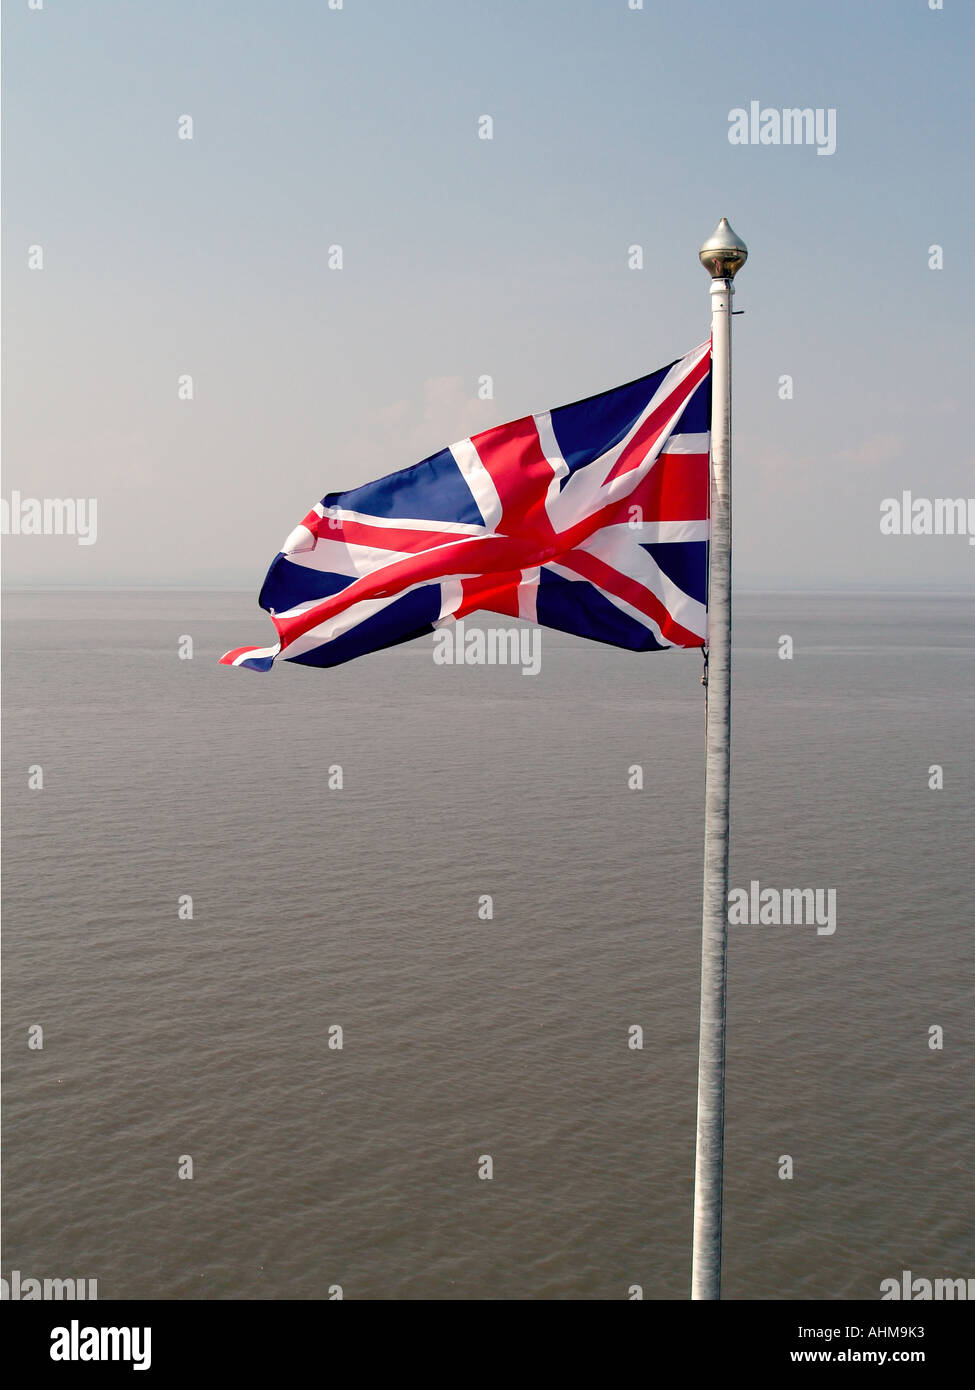 The Union Jack flag of Great Britain flying at Clevedon Pier. Stock Photo